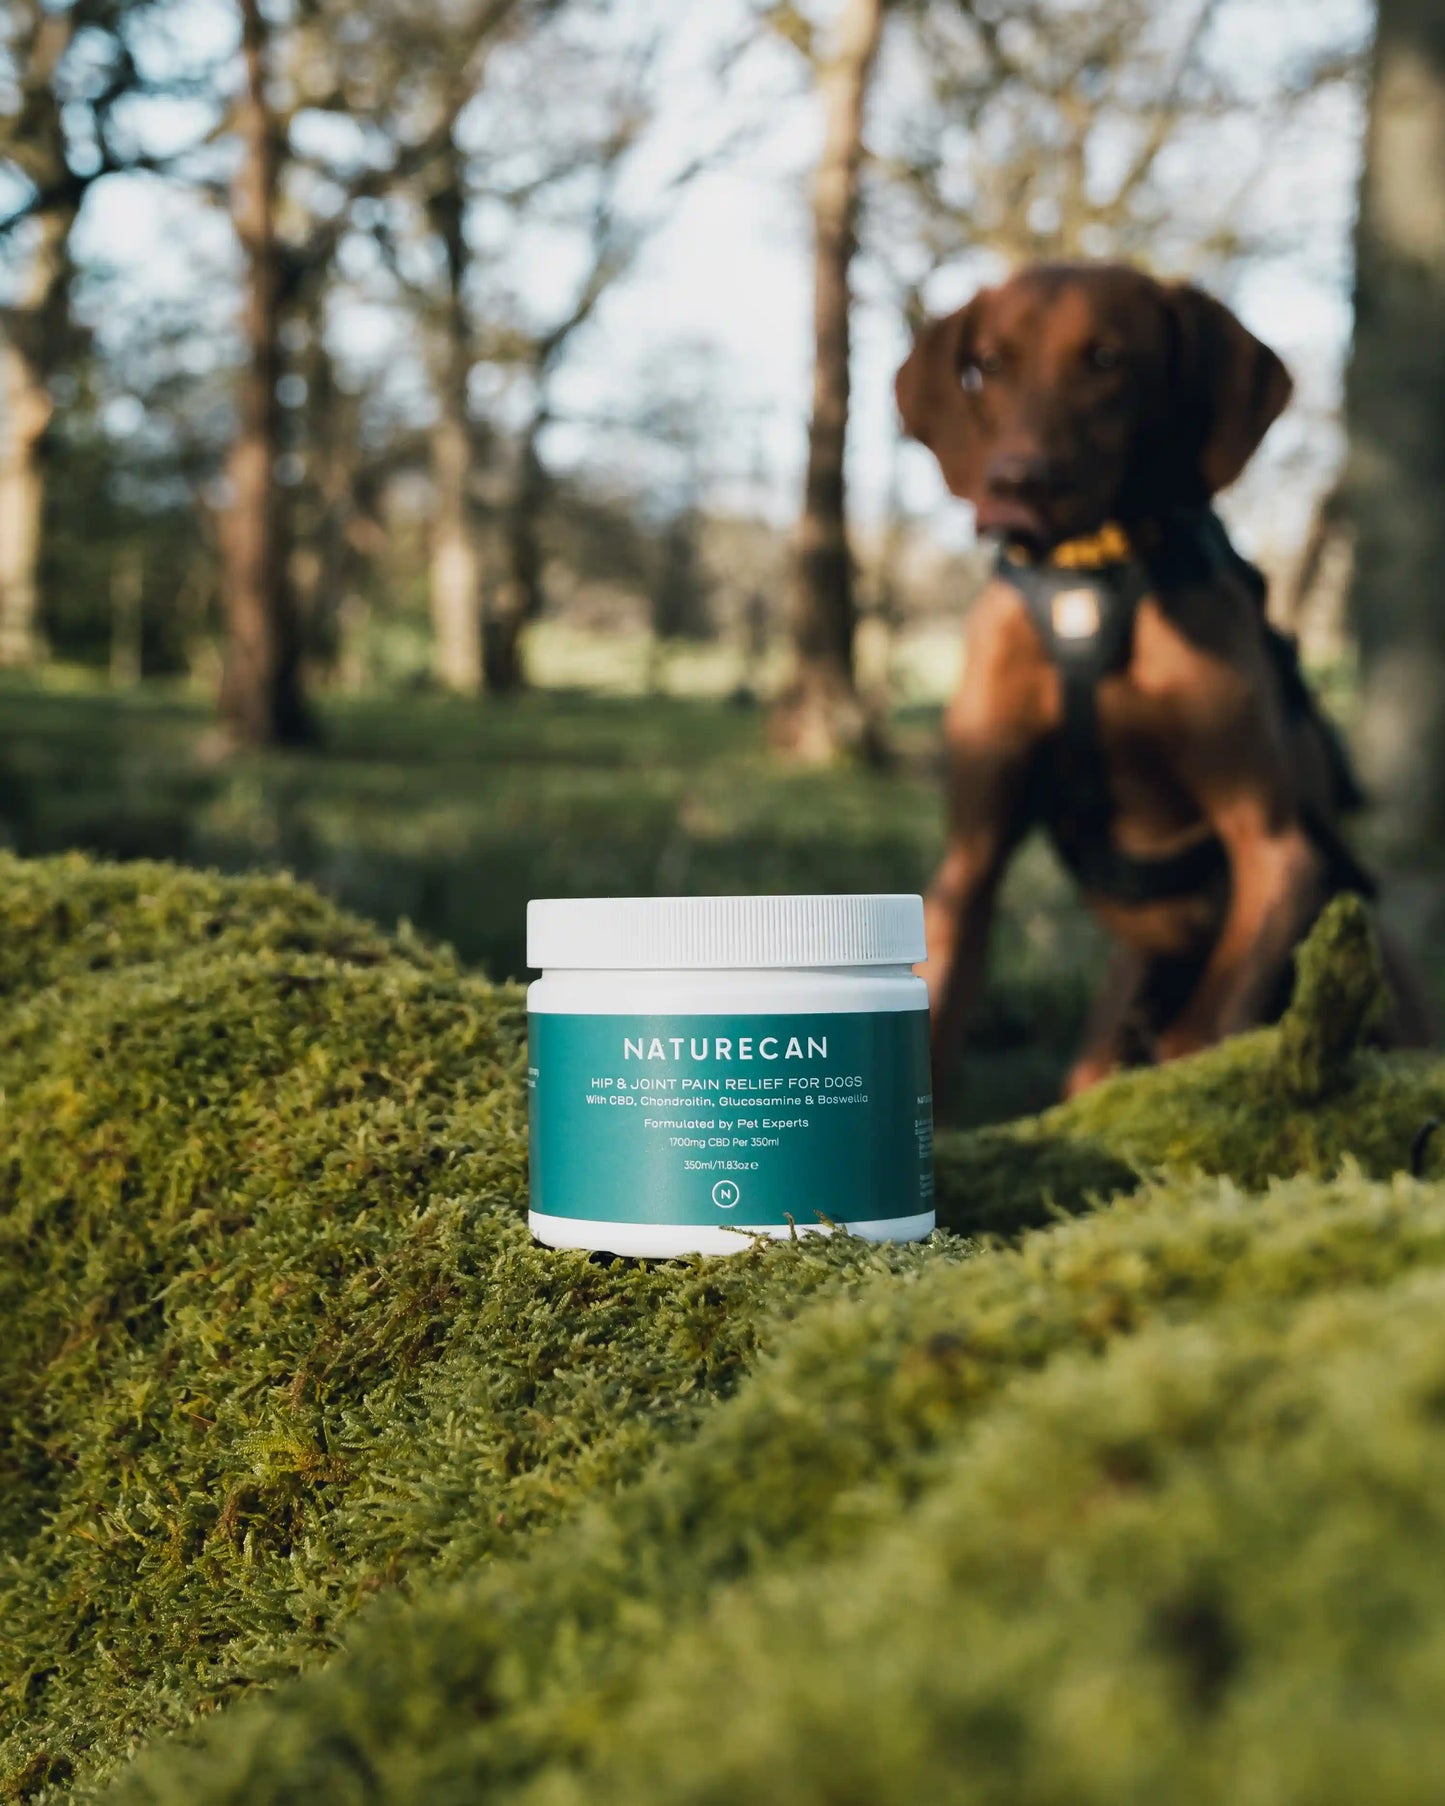 Topical CBD balm in the woods with a dog in the blurred background